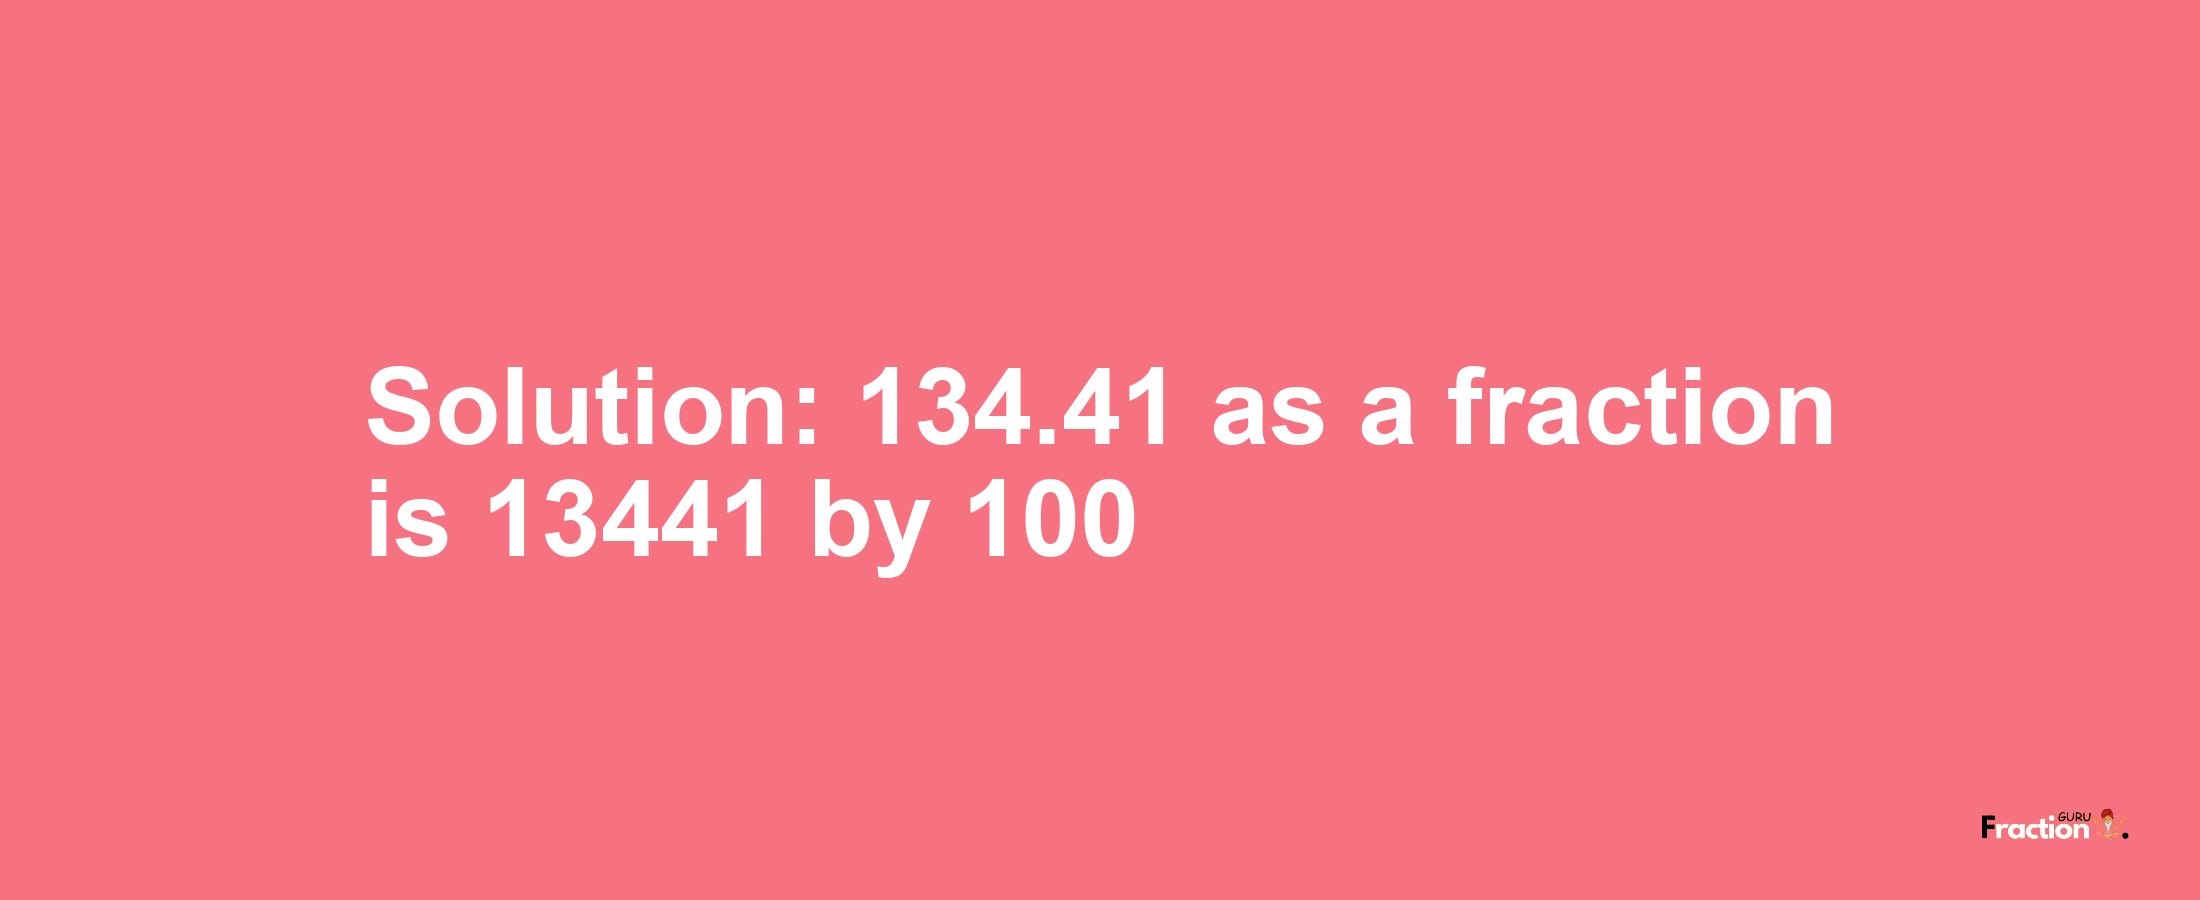 Solution:134.41 as a fraction is 13441/100